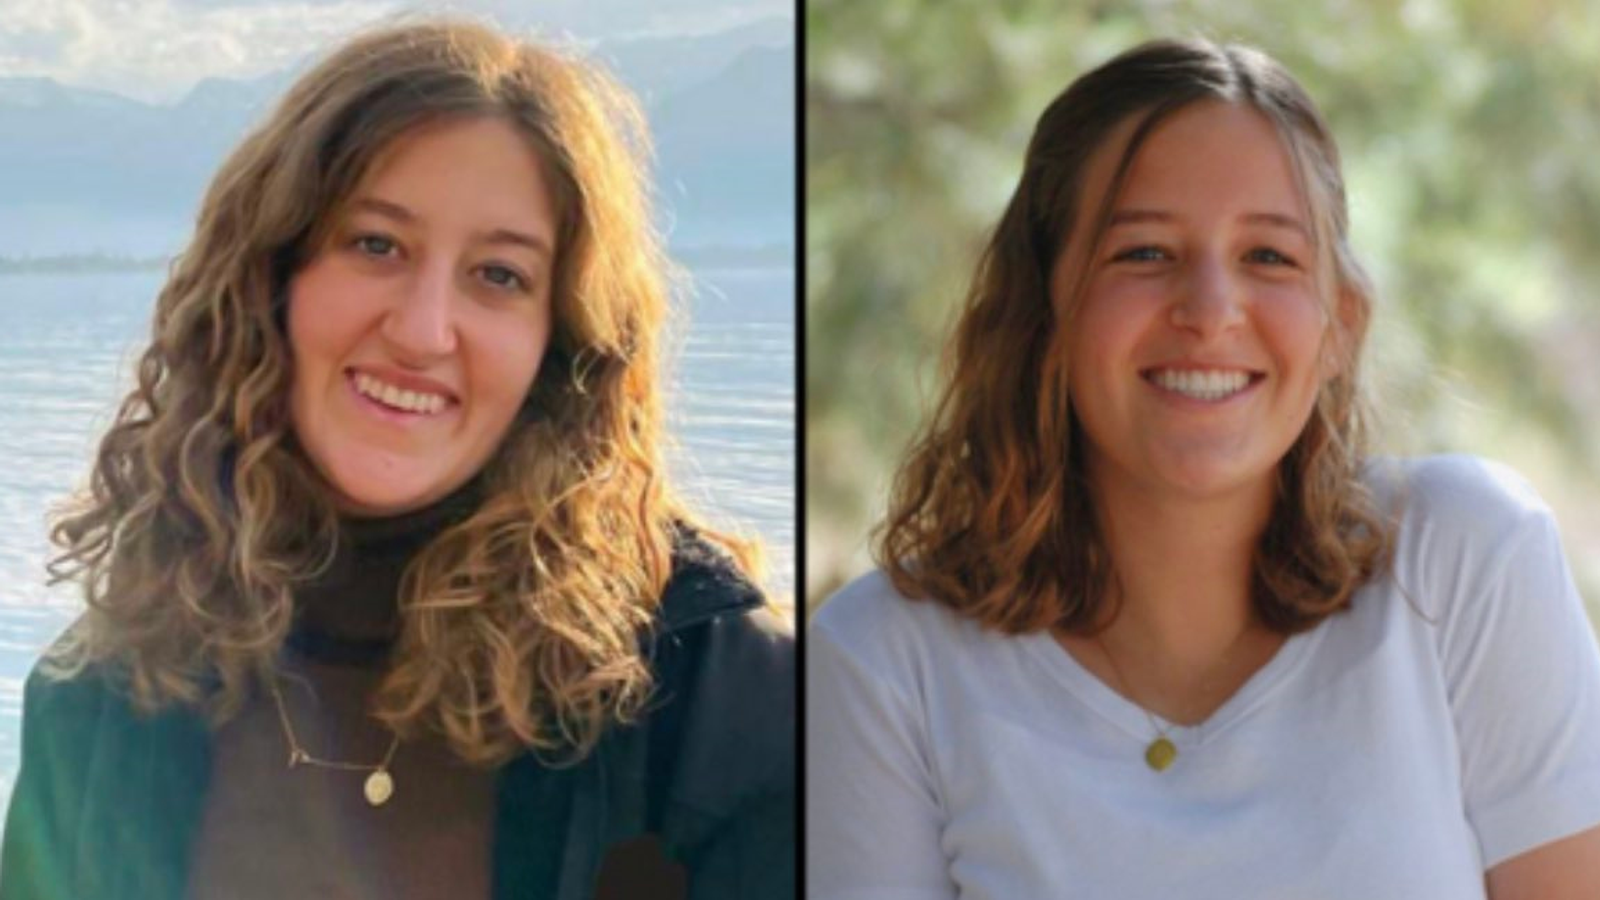 London rabbi 'absolutely devastated' after British-Israeli sisters killed in West Bank shooting